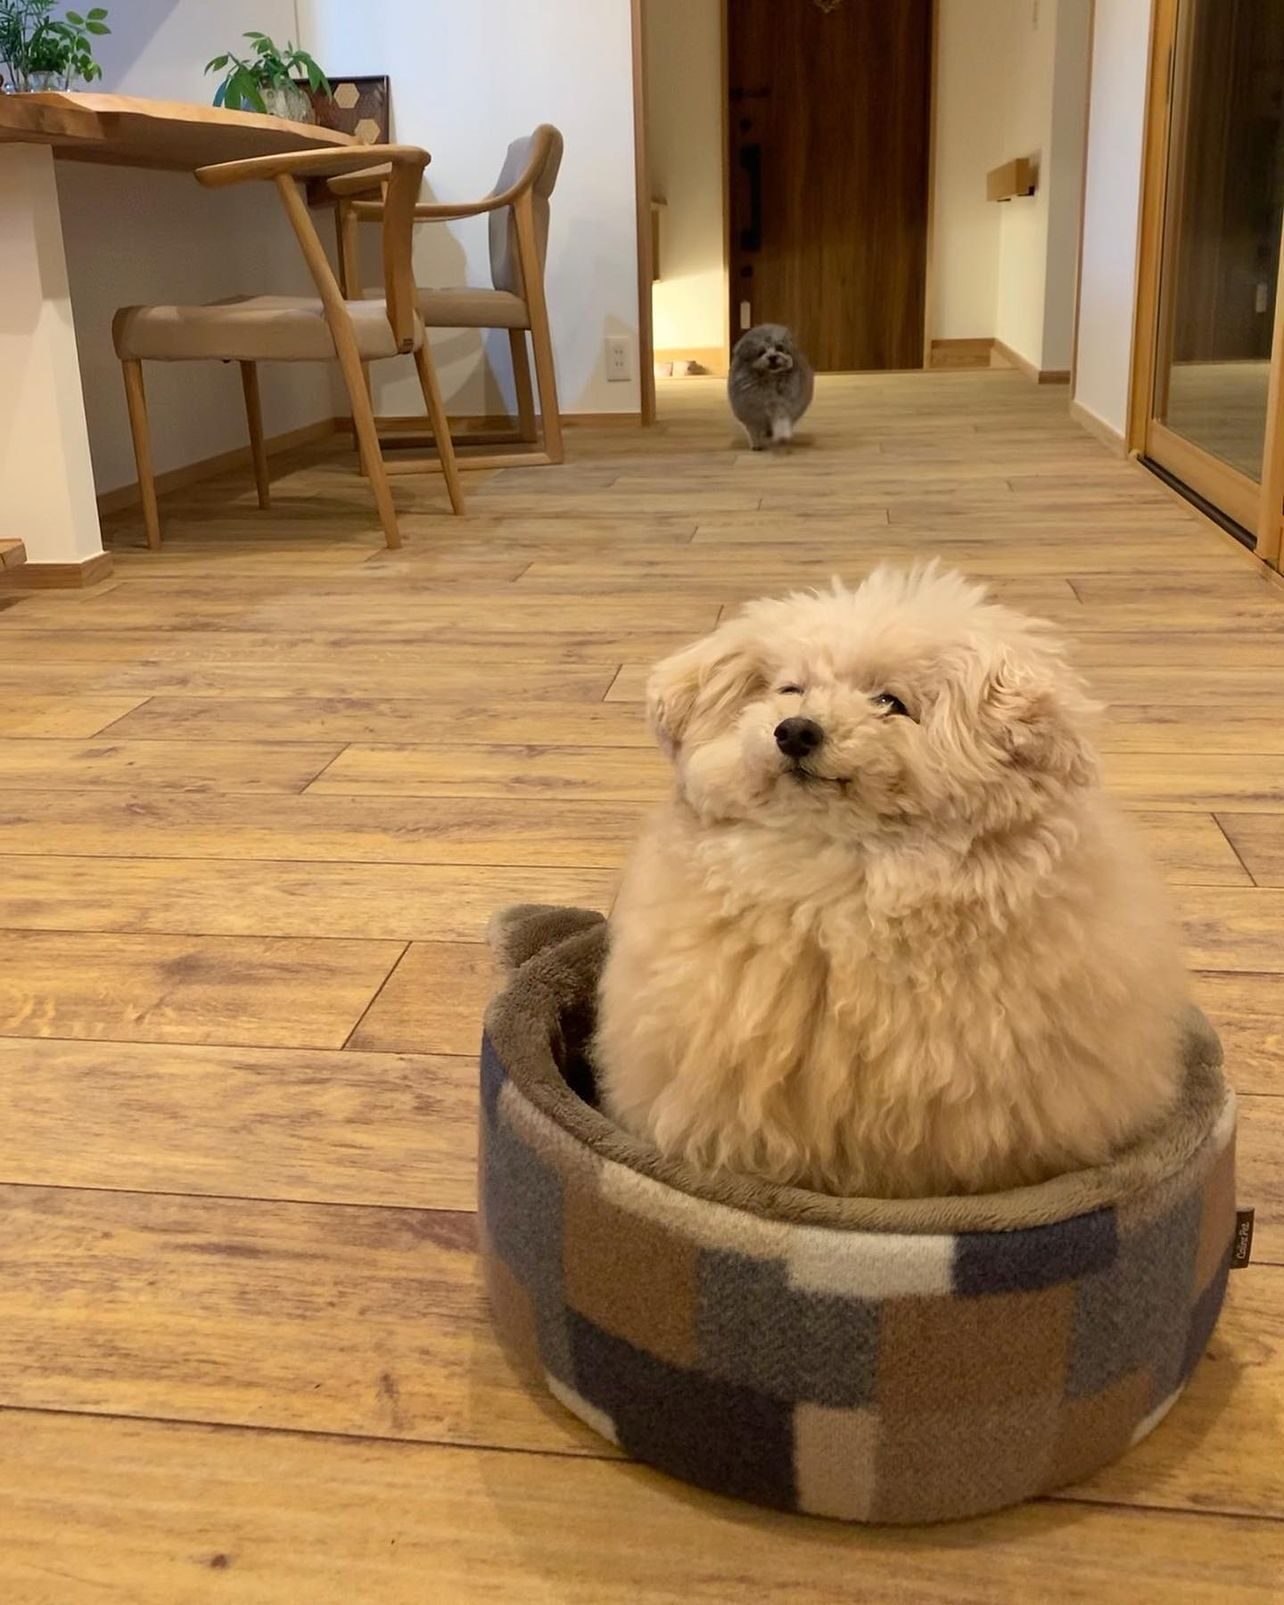 Chubby looking dog sits up right in round dog bed. The dog appears to consume the entire space of the bed